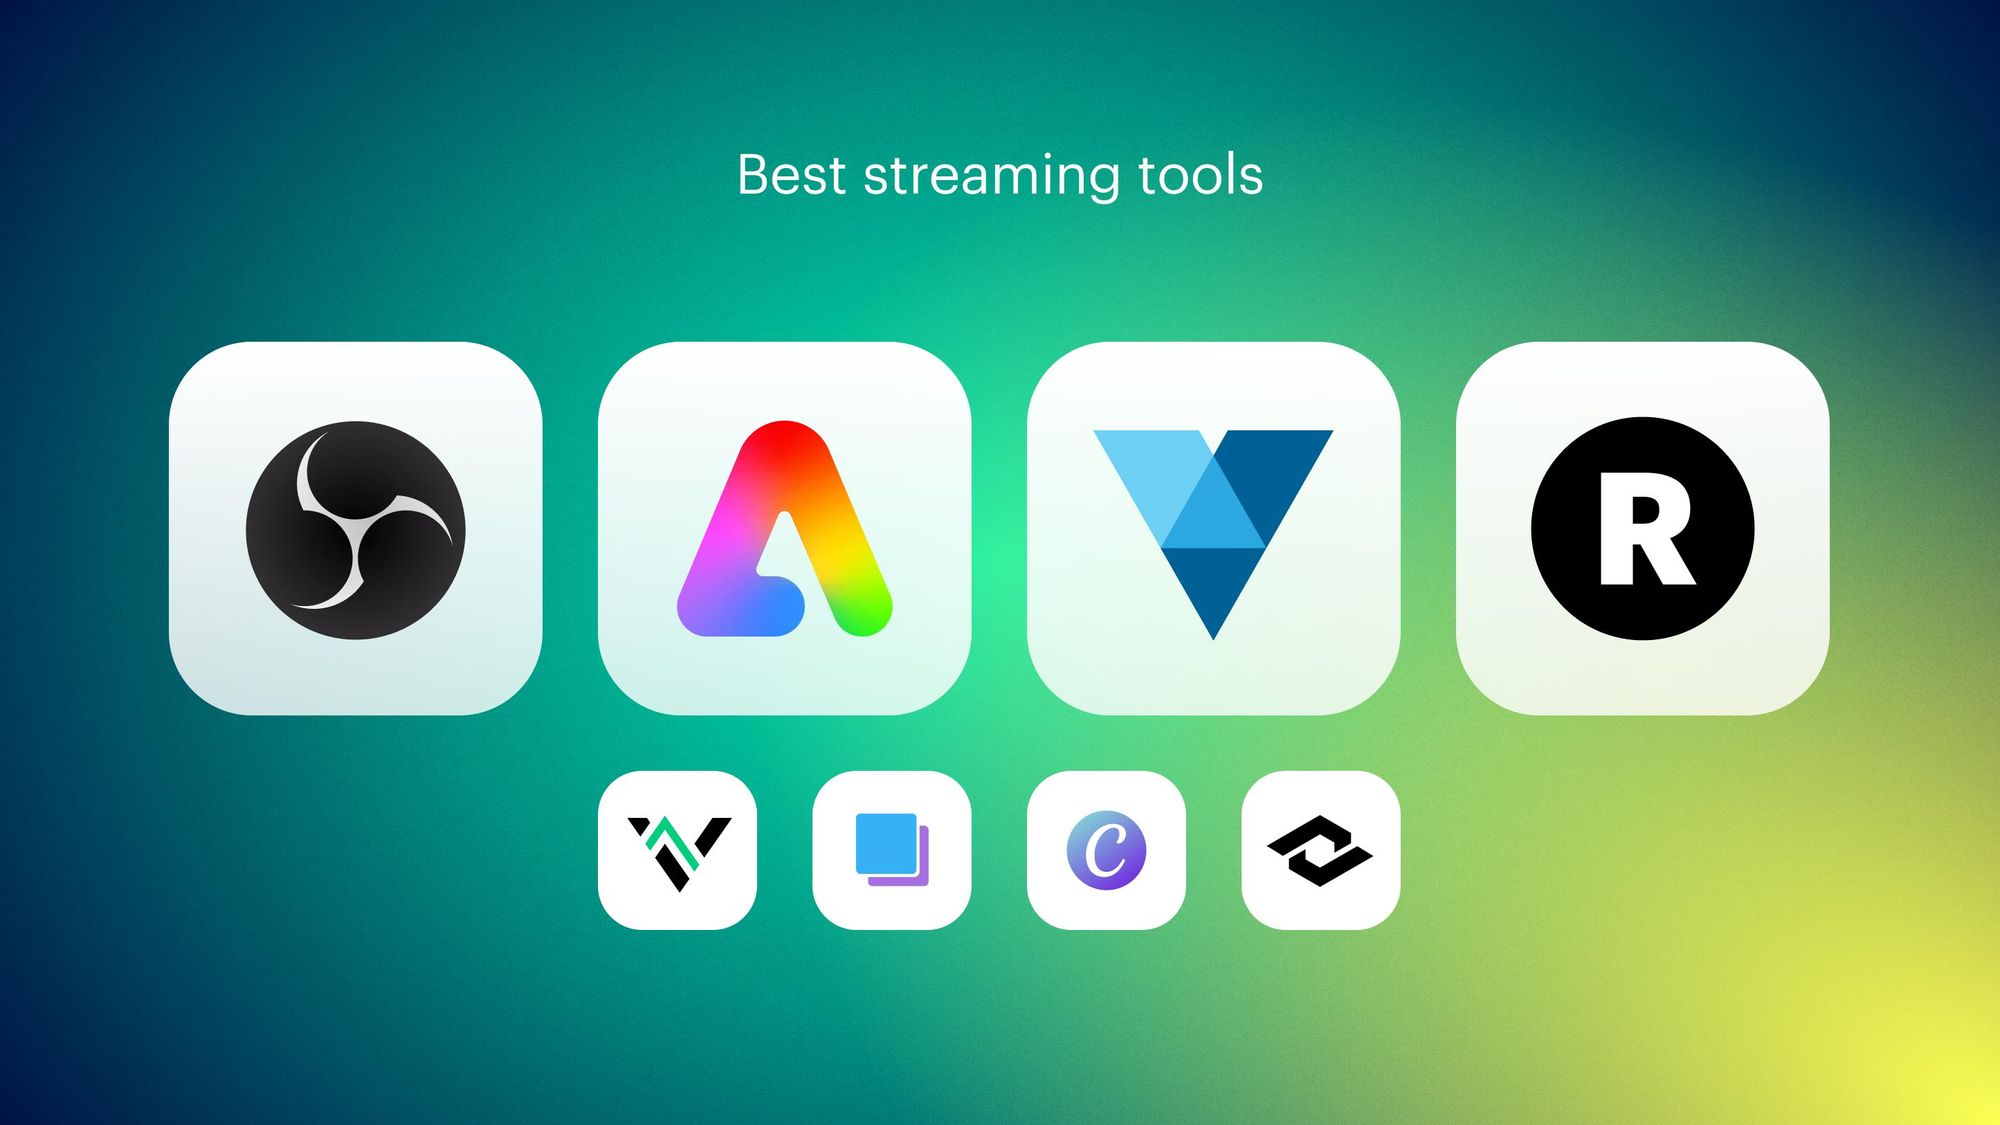 Most useful live streaming tools